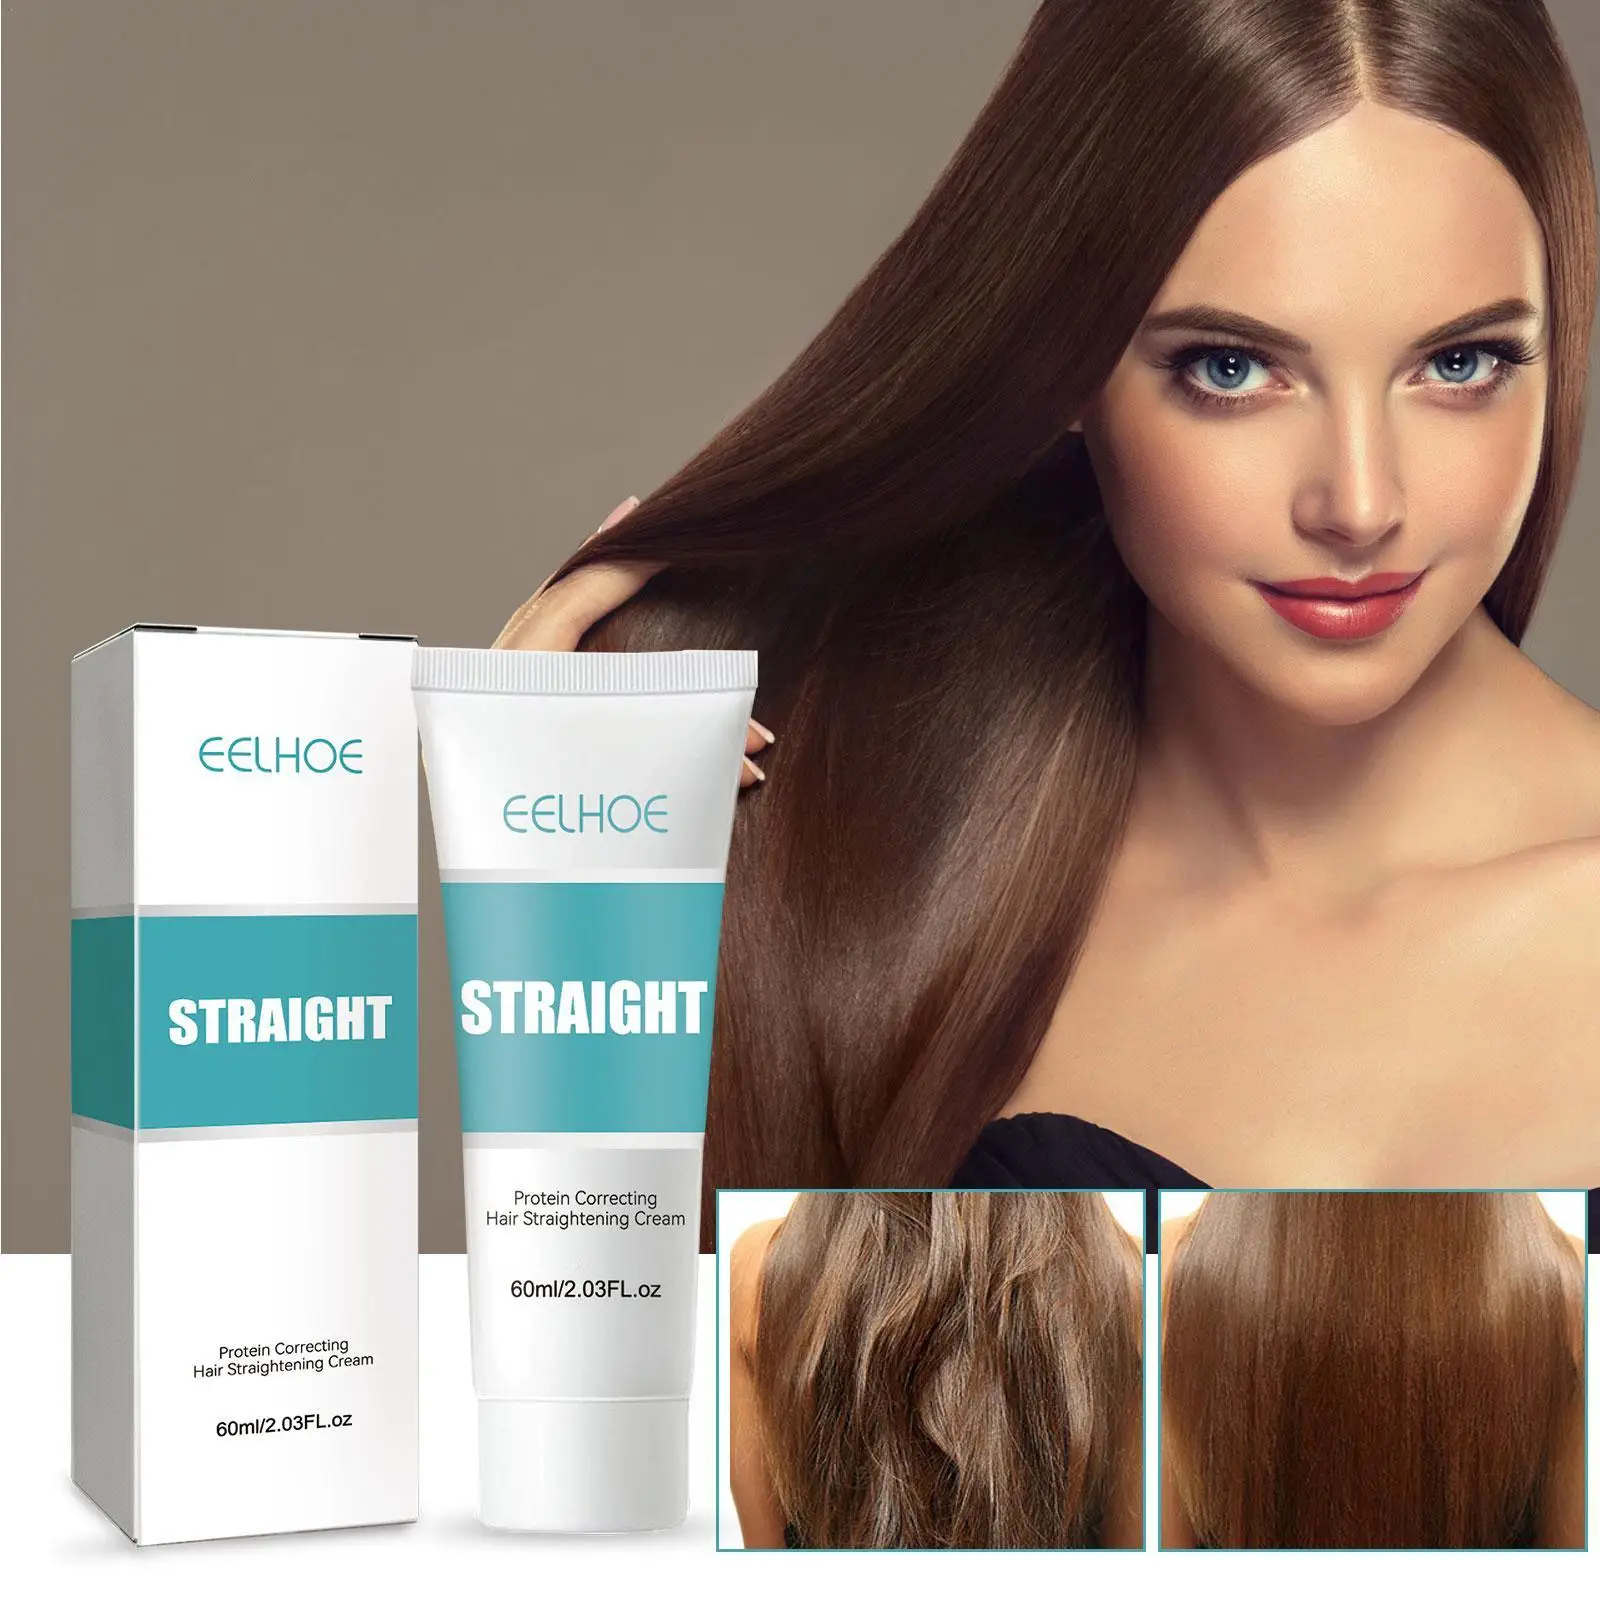 

60ml Protein Correction Keratin Hair Straightening Cream Damaged Treatment Faster Smoothing Curly Women Professional Hair Care